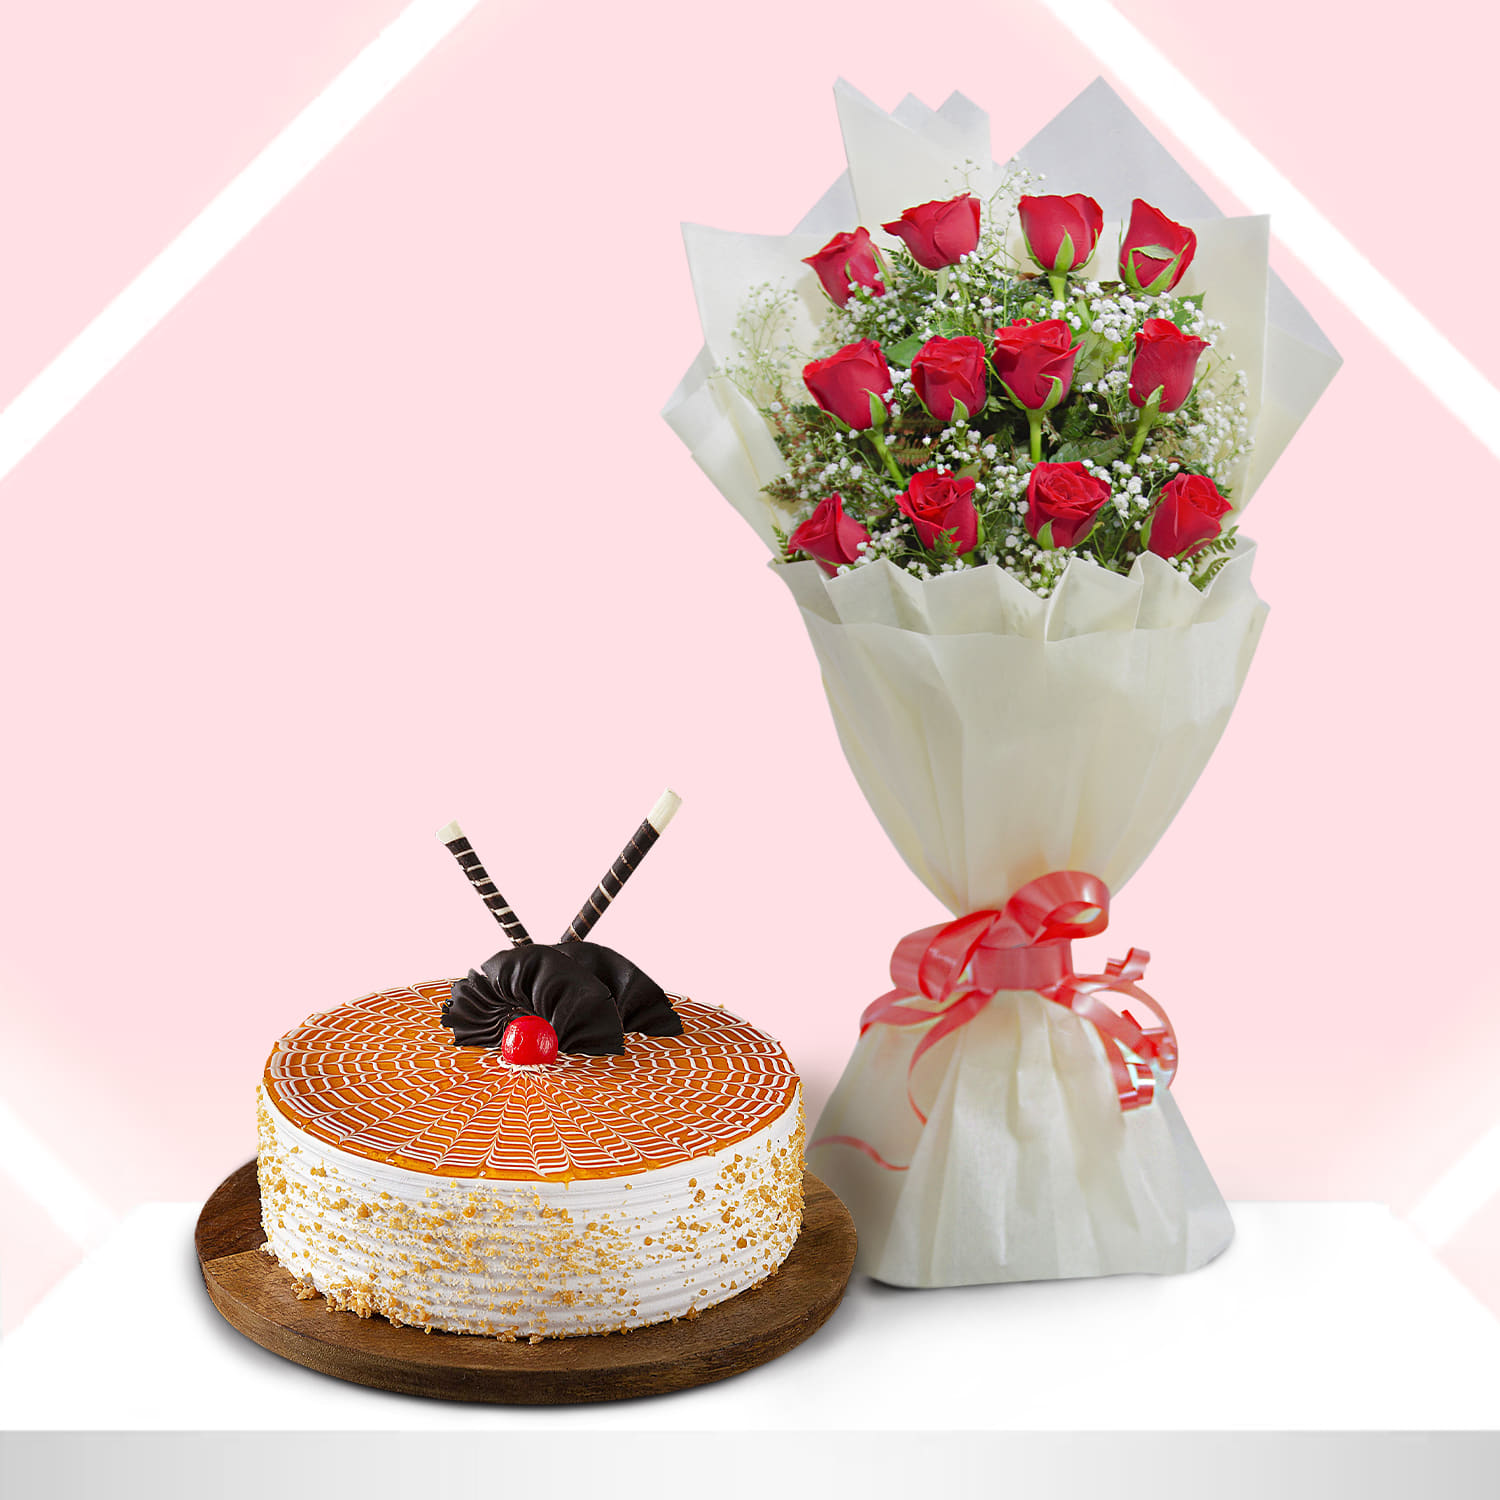 Express Fathers Love, 24x7 Home delivery of Cake in Bahadurgarh Arwasi,  Allahabad